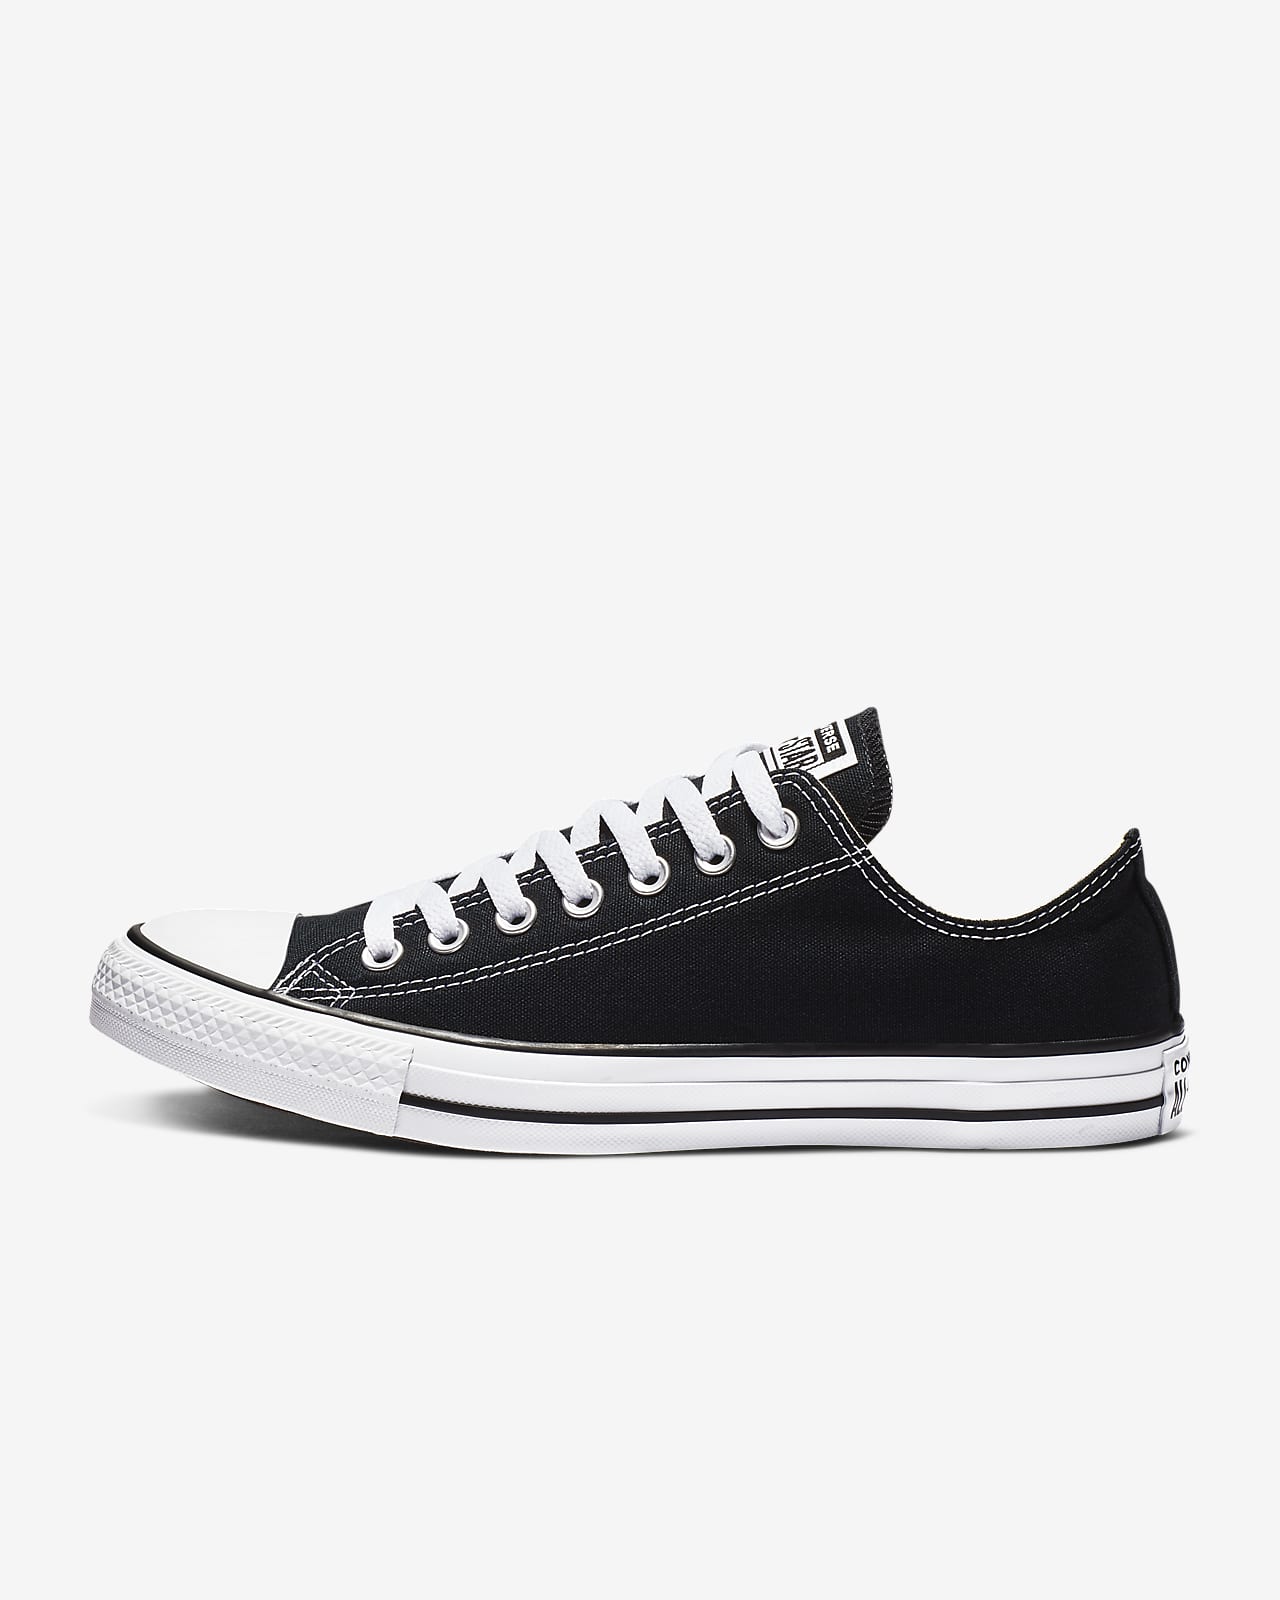 Converse Chuck Taylor All Star Low Top Shoes